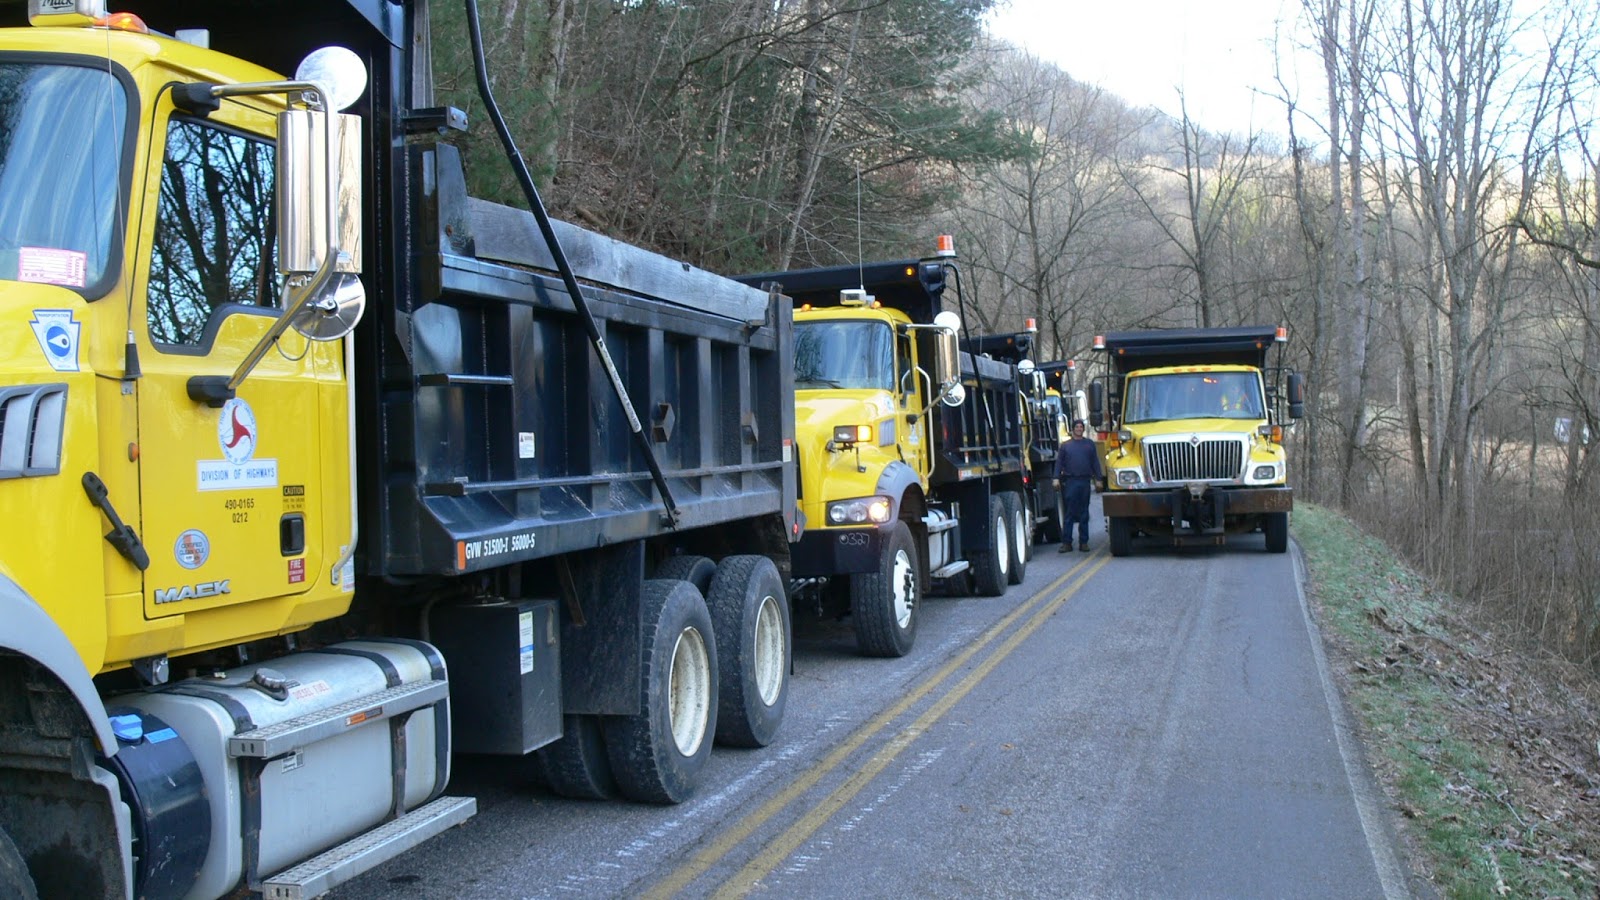 NCDOT Dumptrucks lined up to carry away dirt and debris